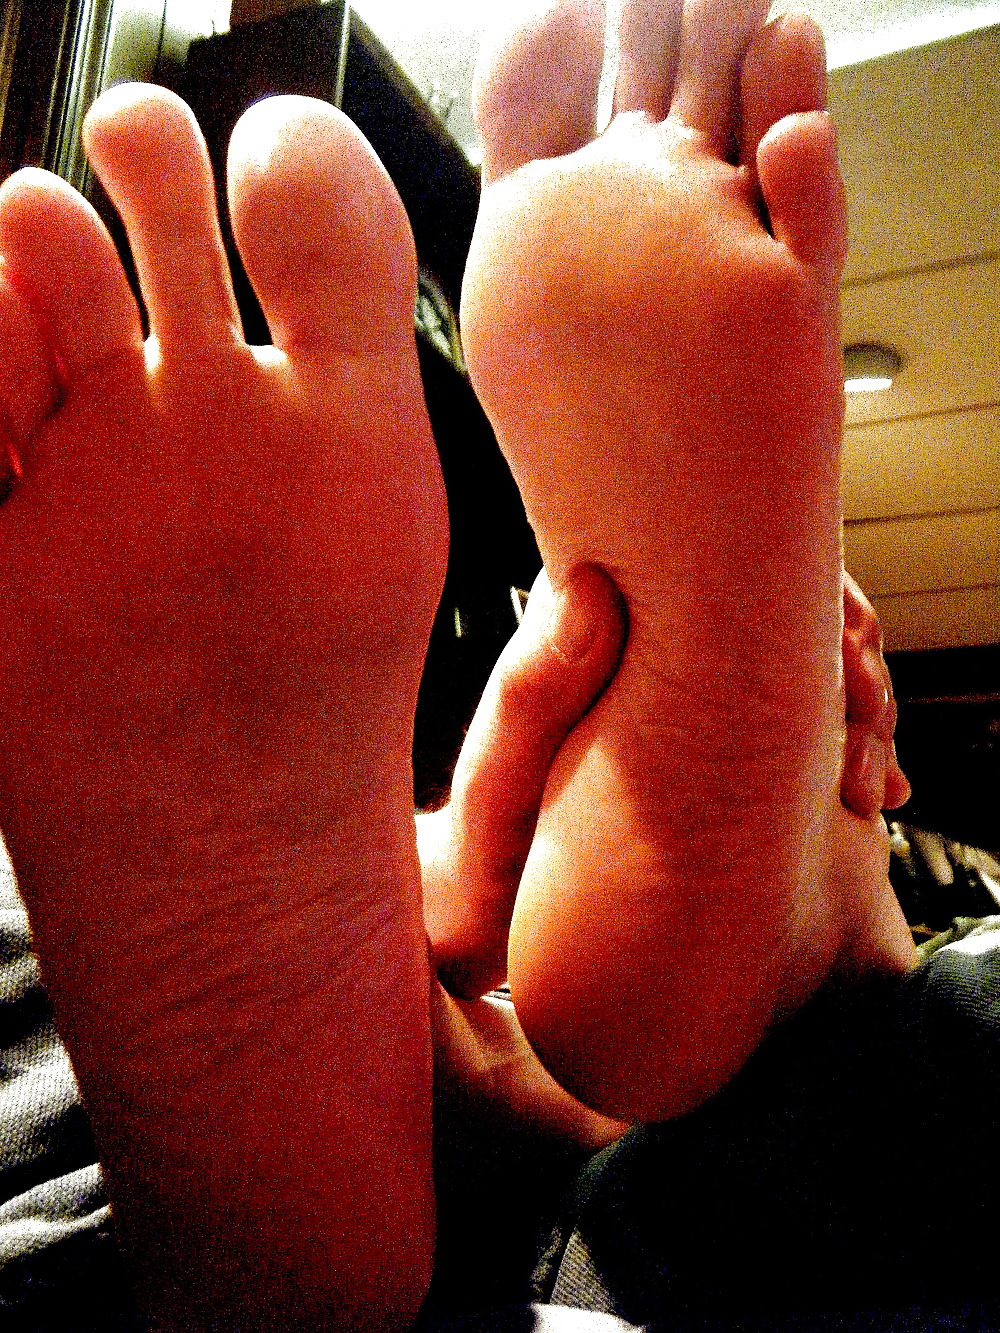 More candid shots of my wife's exquisite feet and toes #1762240